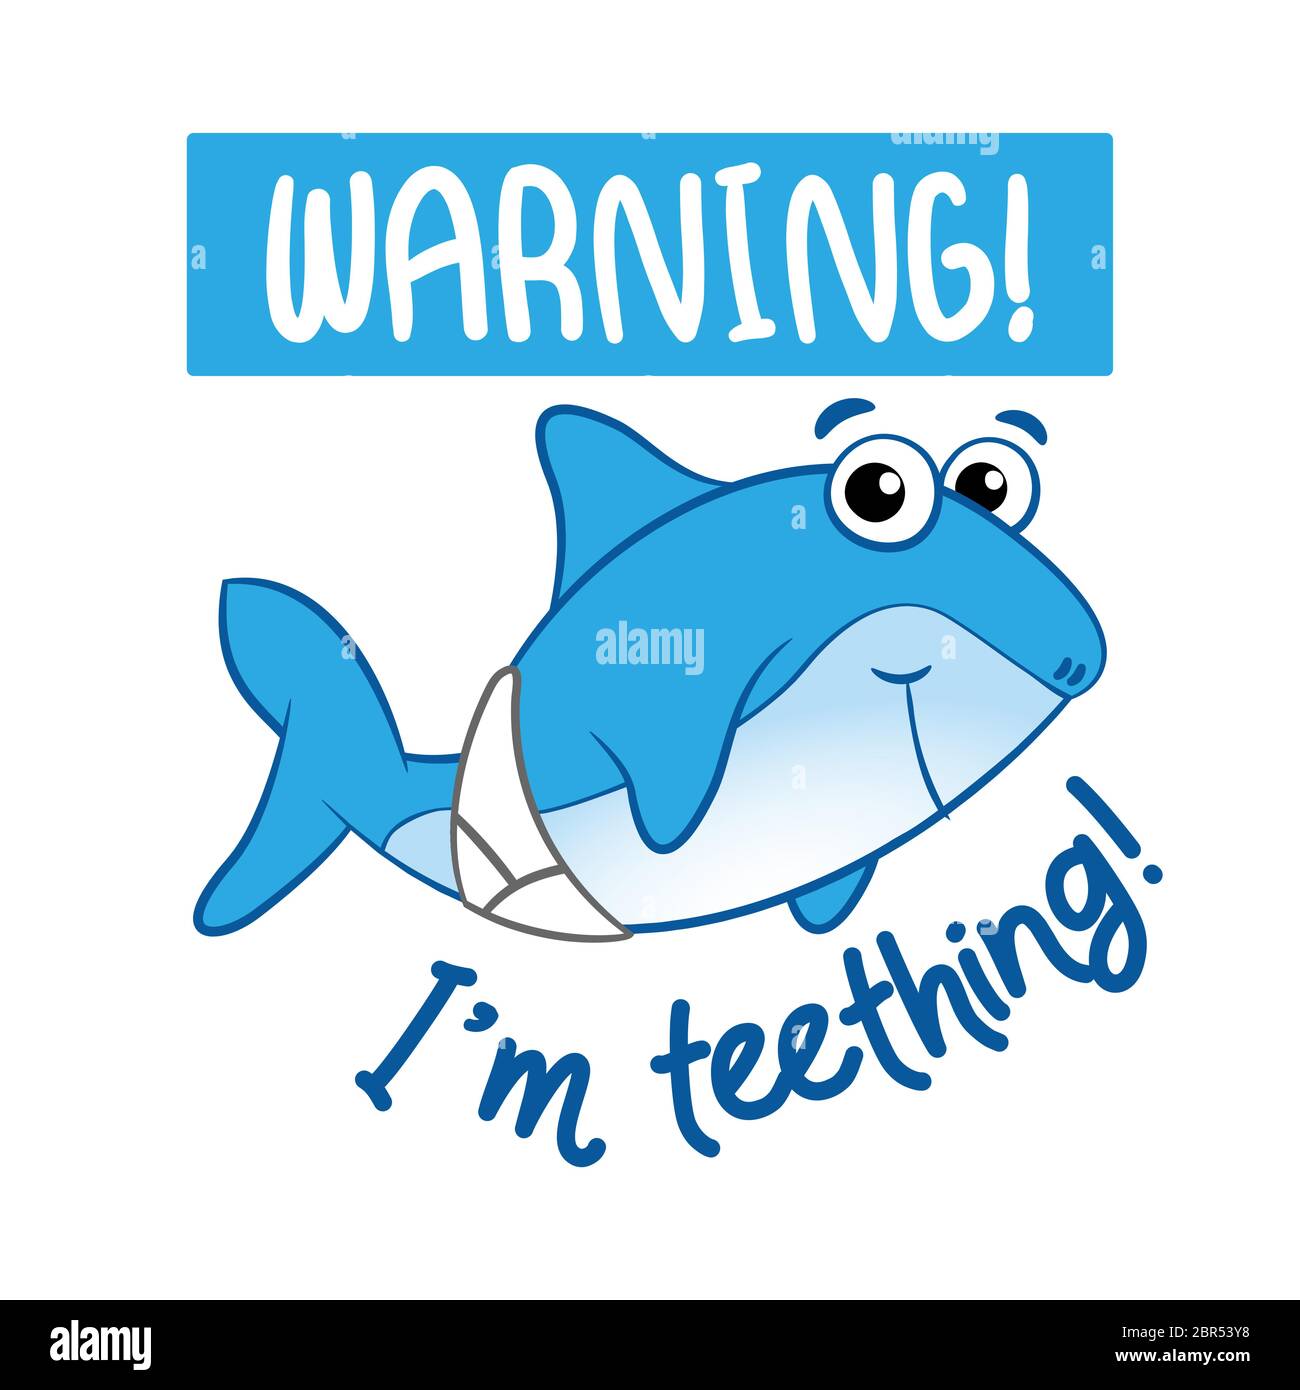 Warning! I'm teething - T-Shirts, Hoodie, Tank, gifts. Vector illustration text for clothes. Inspirational quote card, invitation, banner. Kids callig Stock Vector